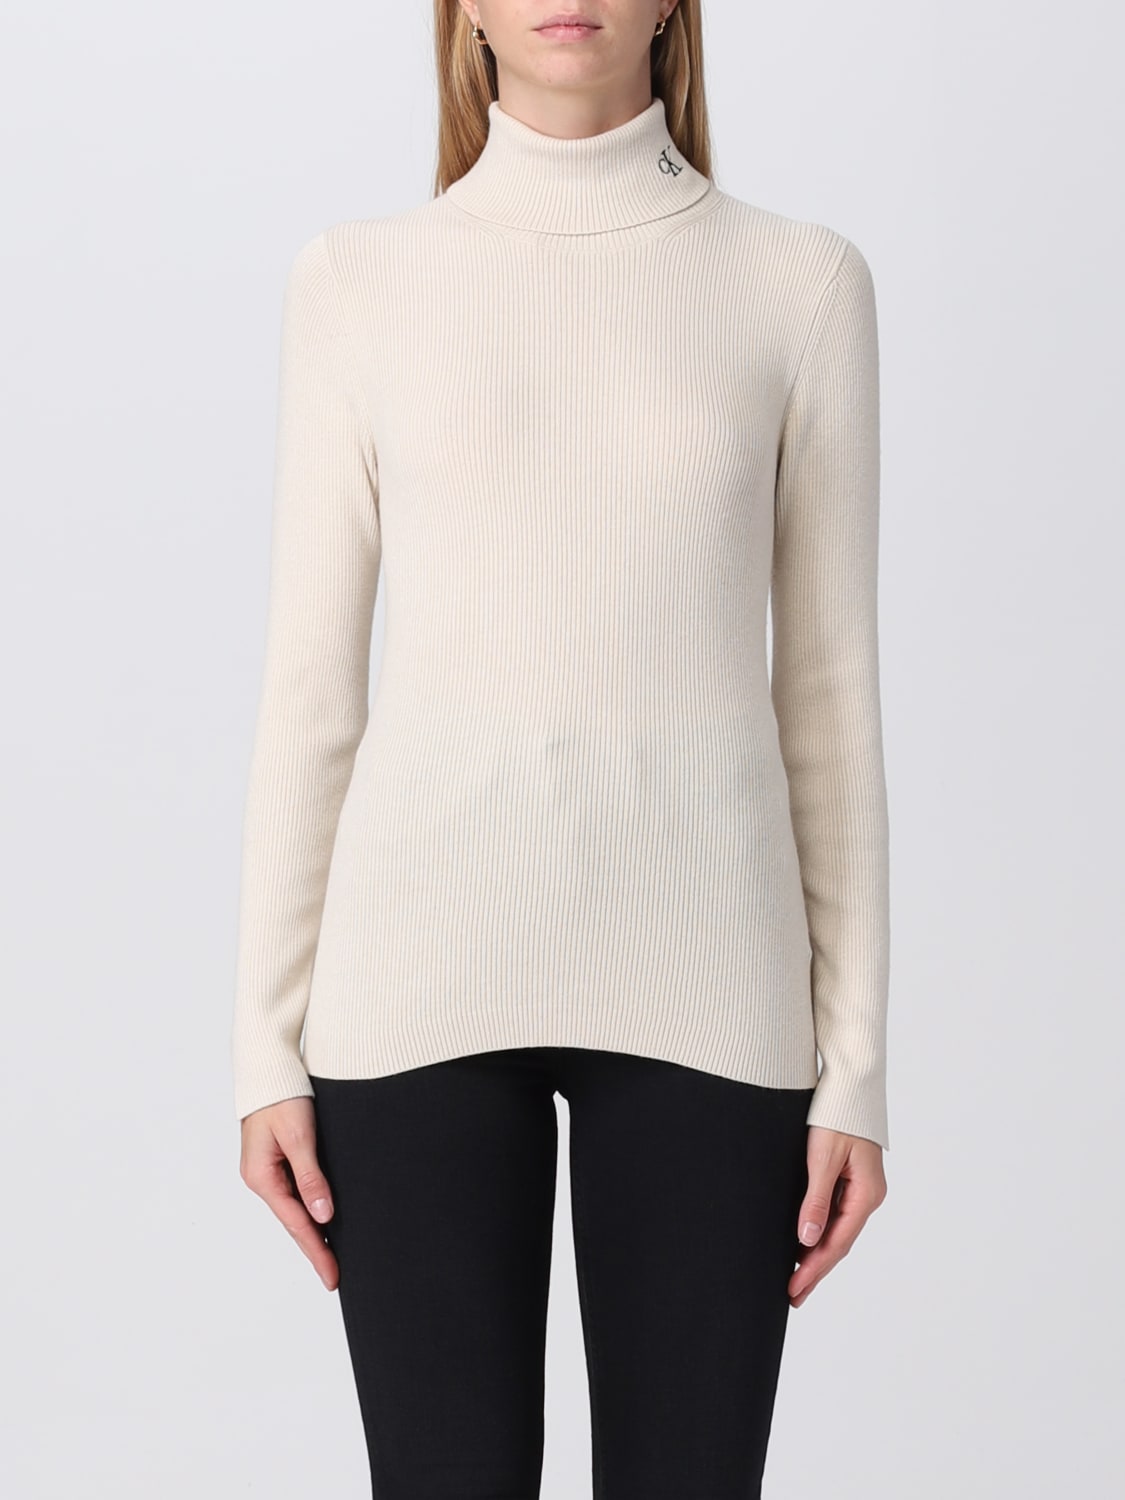 Calvin Klein Jeans Solid High Neck Casual Women White Sweater - Buy Calvin  Klein Jeans Solid High Neck Casual Women White Sweater Online at Best  Prices in India